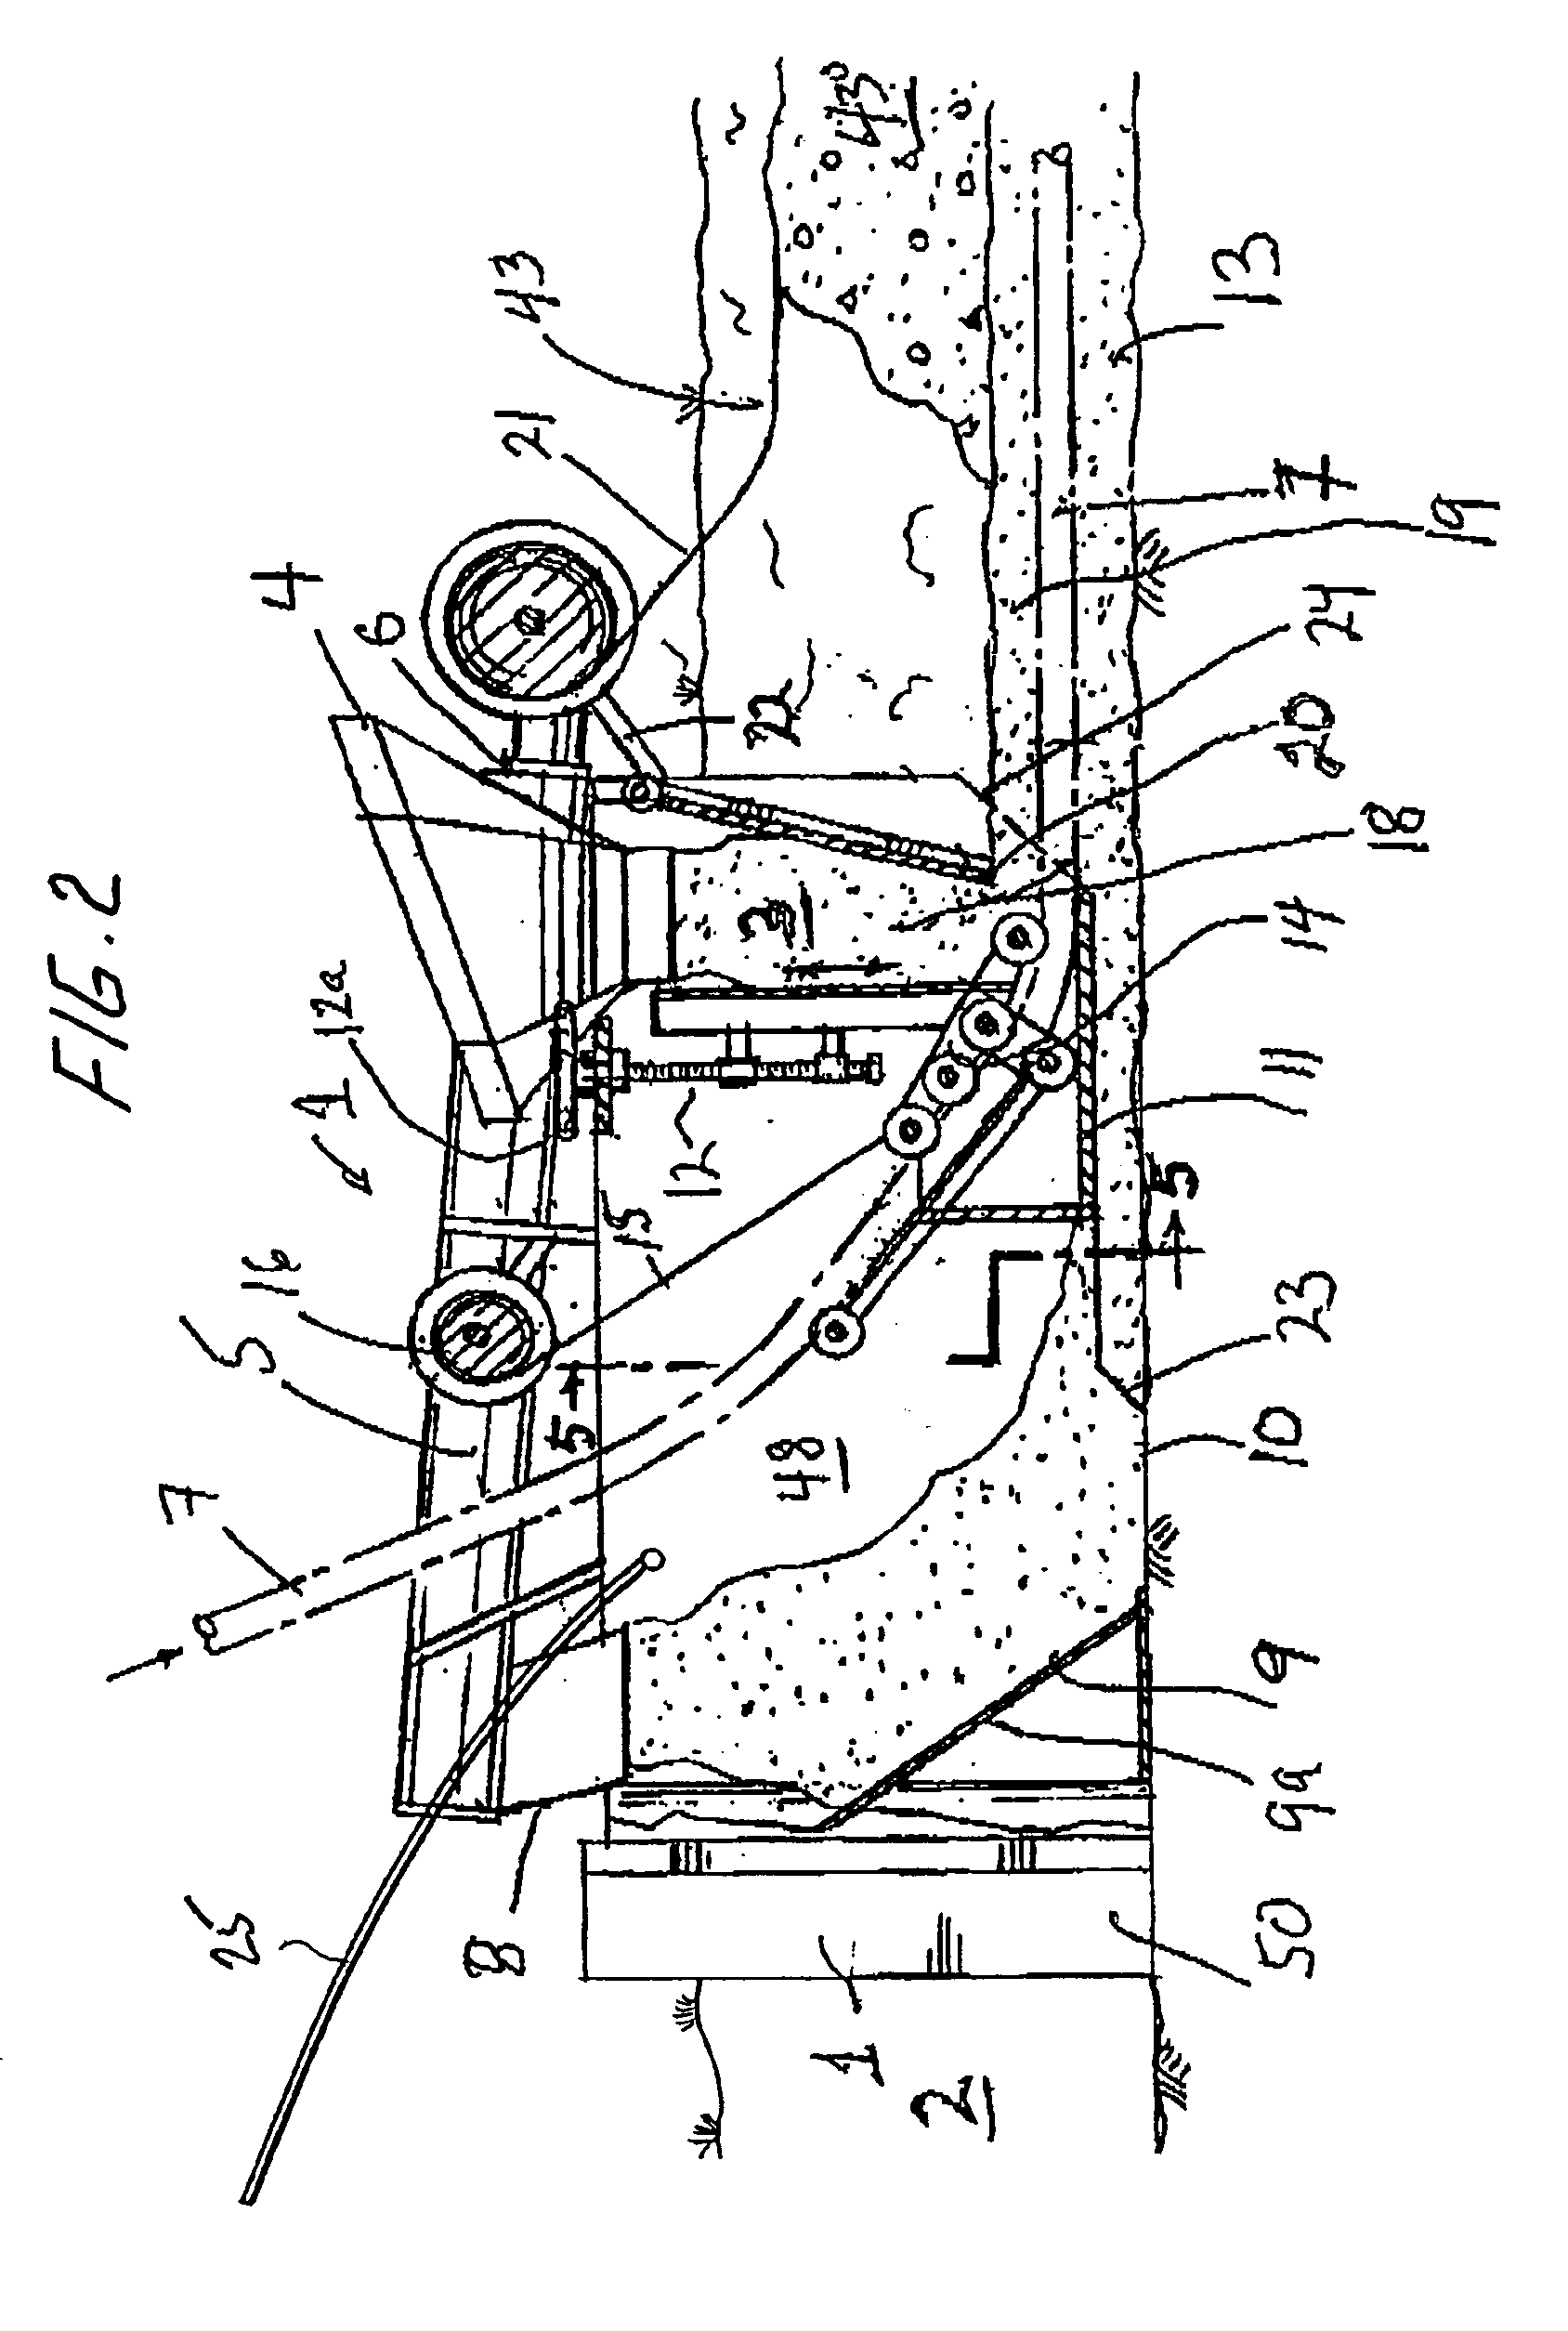 Apparatus for establishing adjustable depth bed in trenches for utility lines and encasing the lines